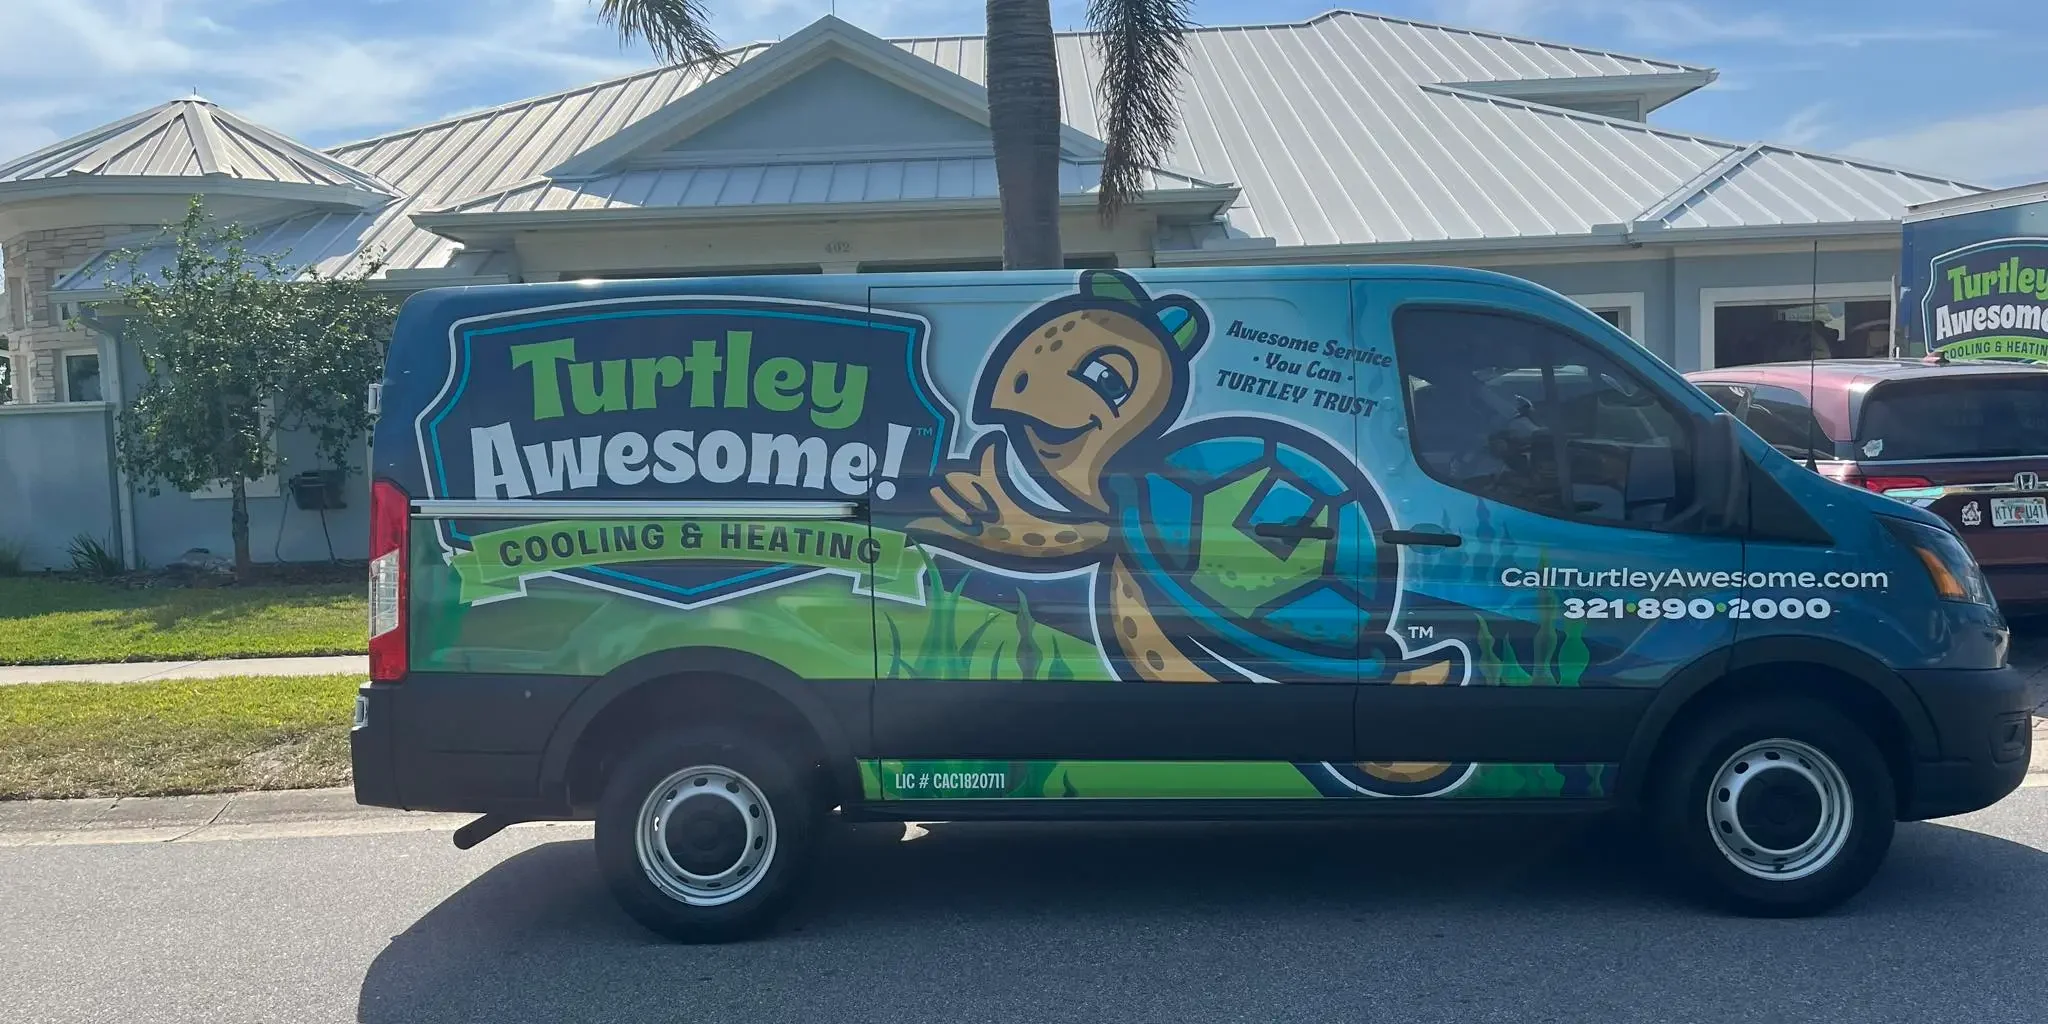 Picture of Turtley Awesome Van and Box Truck in Melbourne, FL